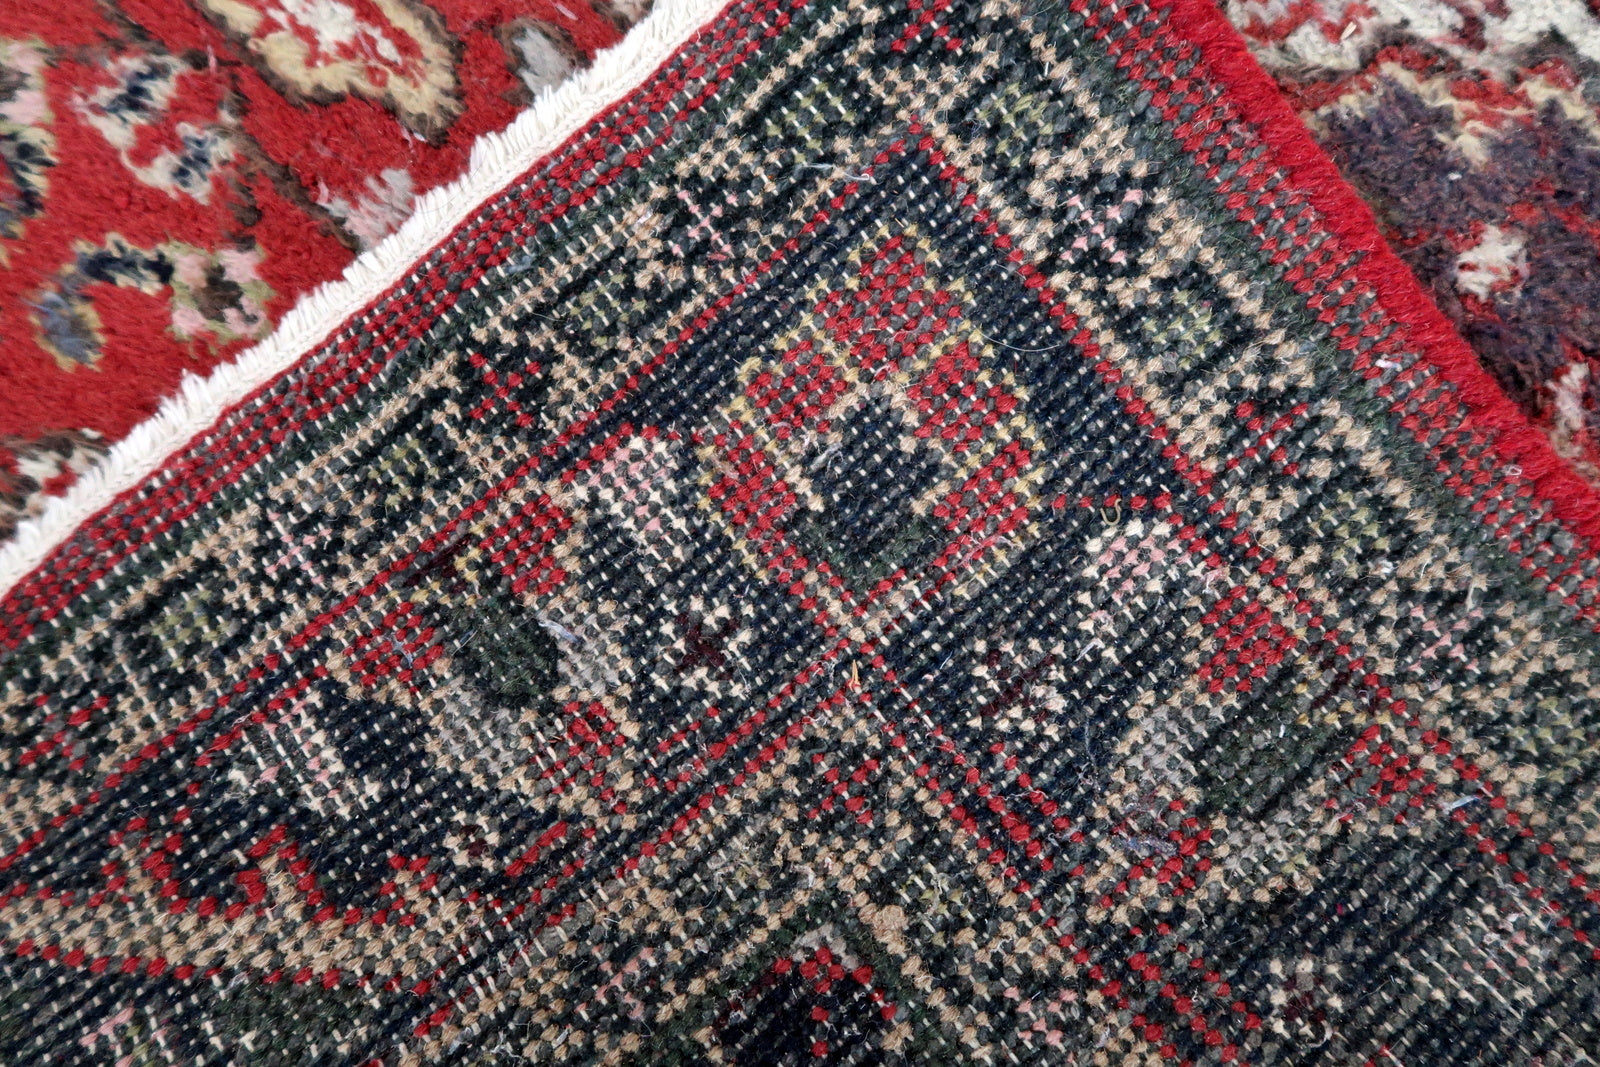 Handmade vintage Persian Hamadan rug in red and blue colors. The rug is from the end of 20th century in original good condition.